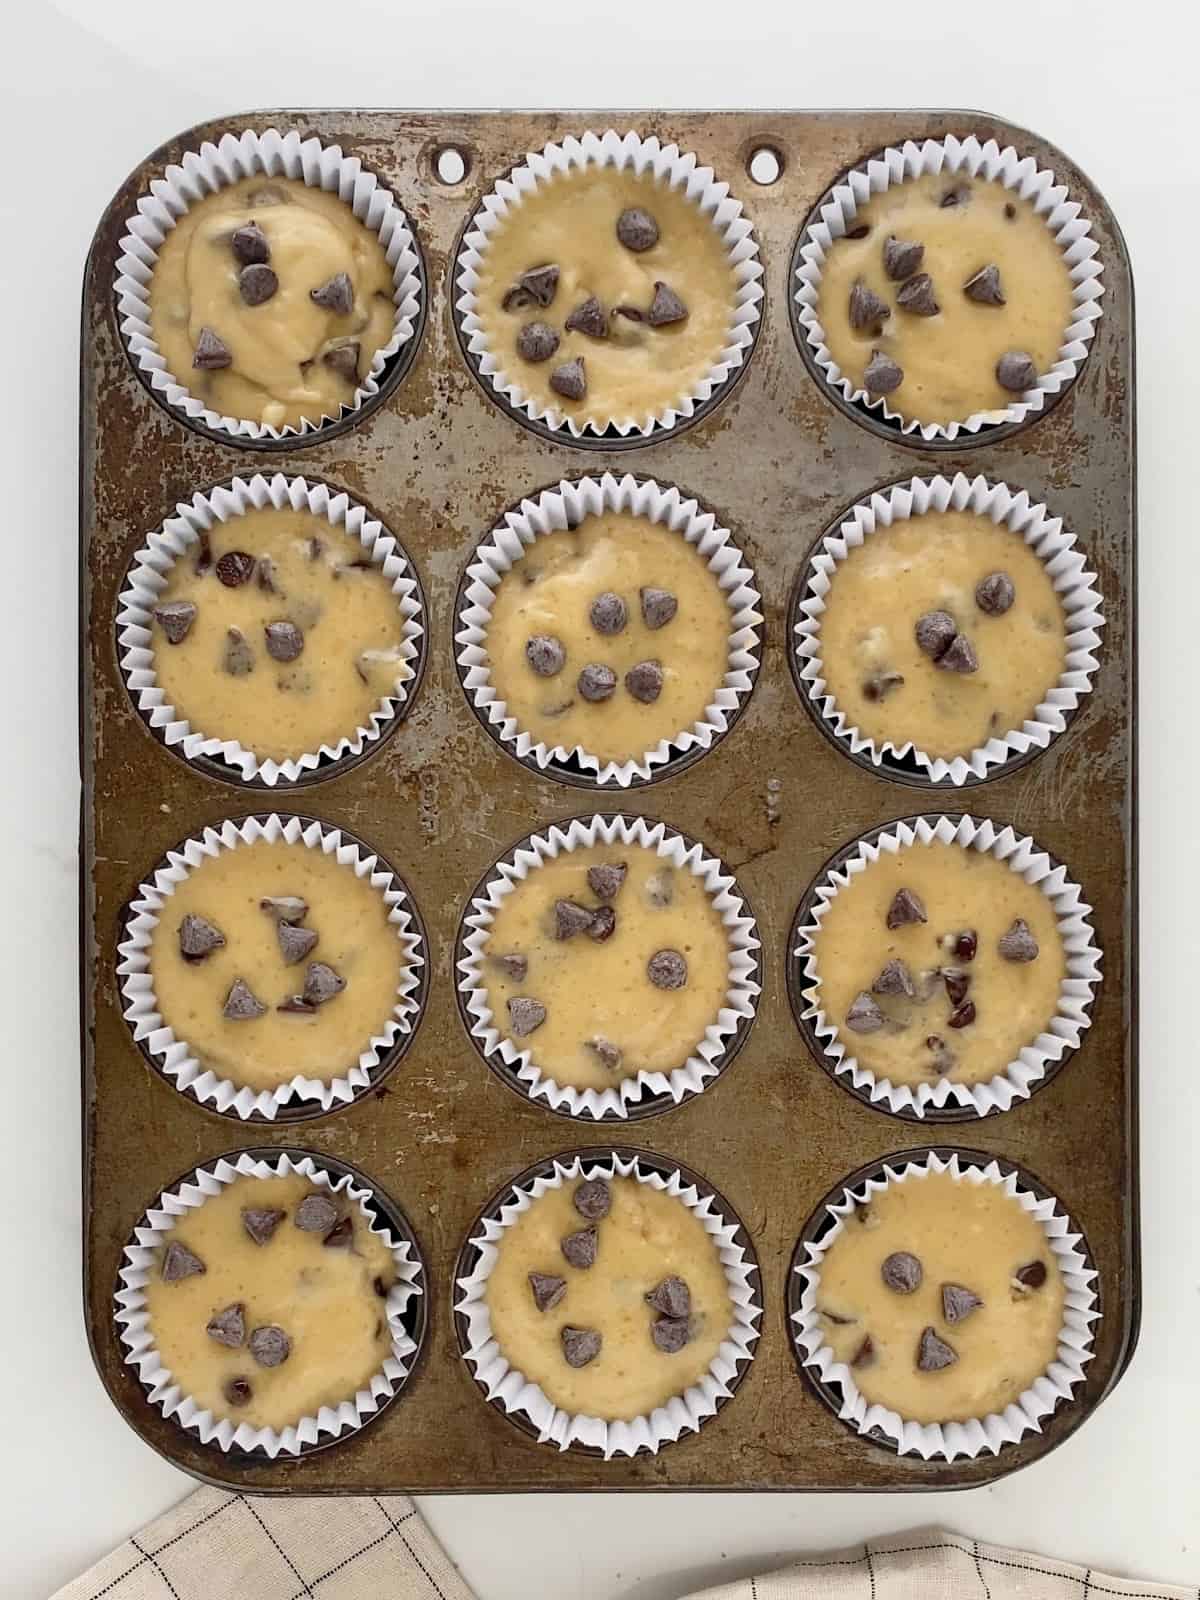 Chocolate chip muffin batter in a metal pan with paper liners. White surface.